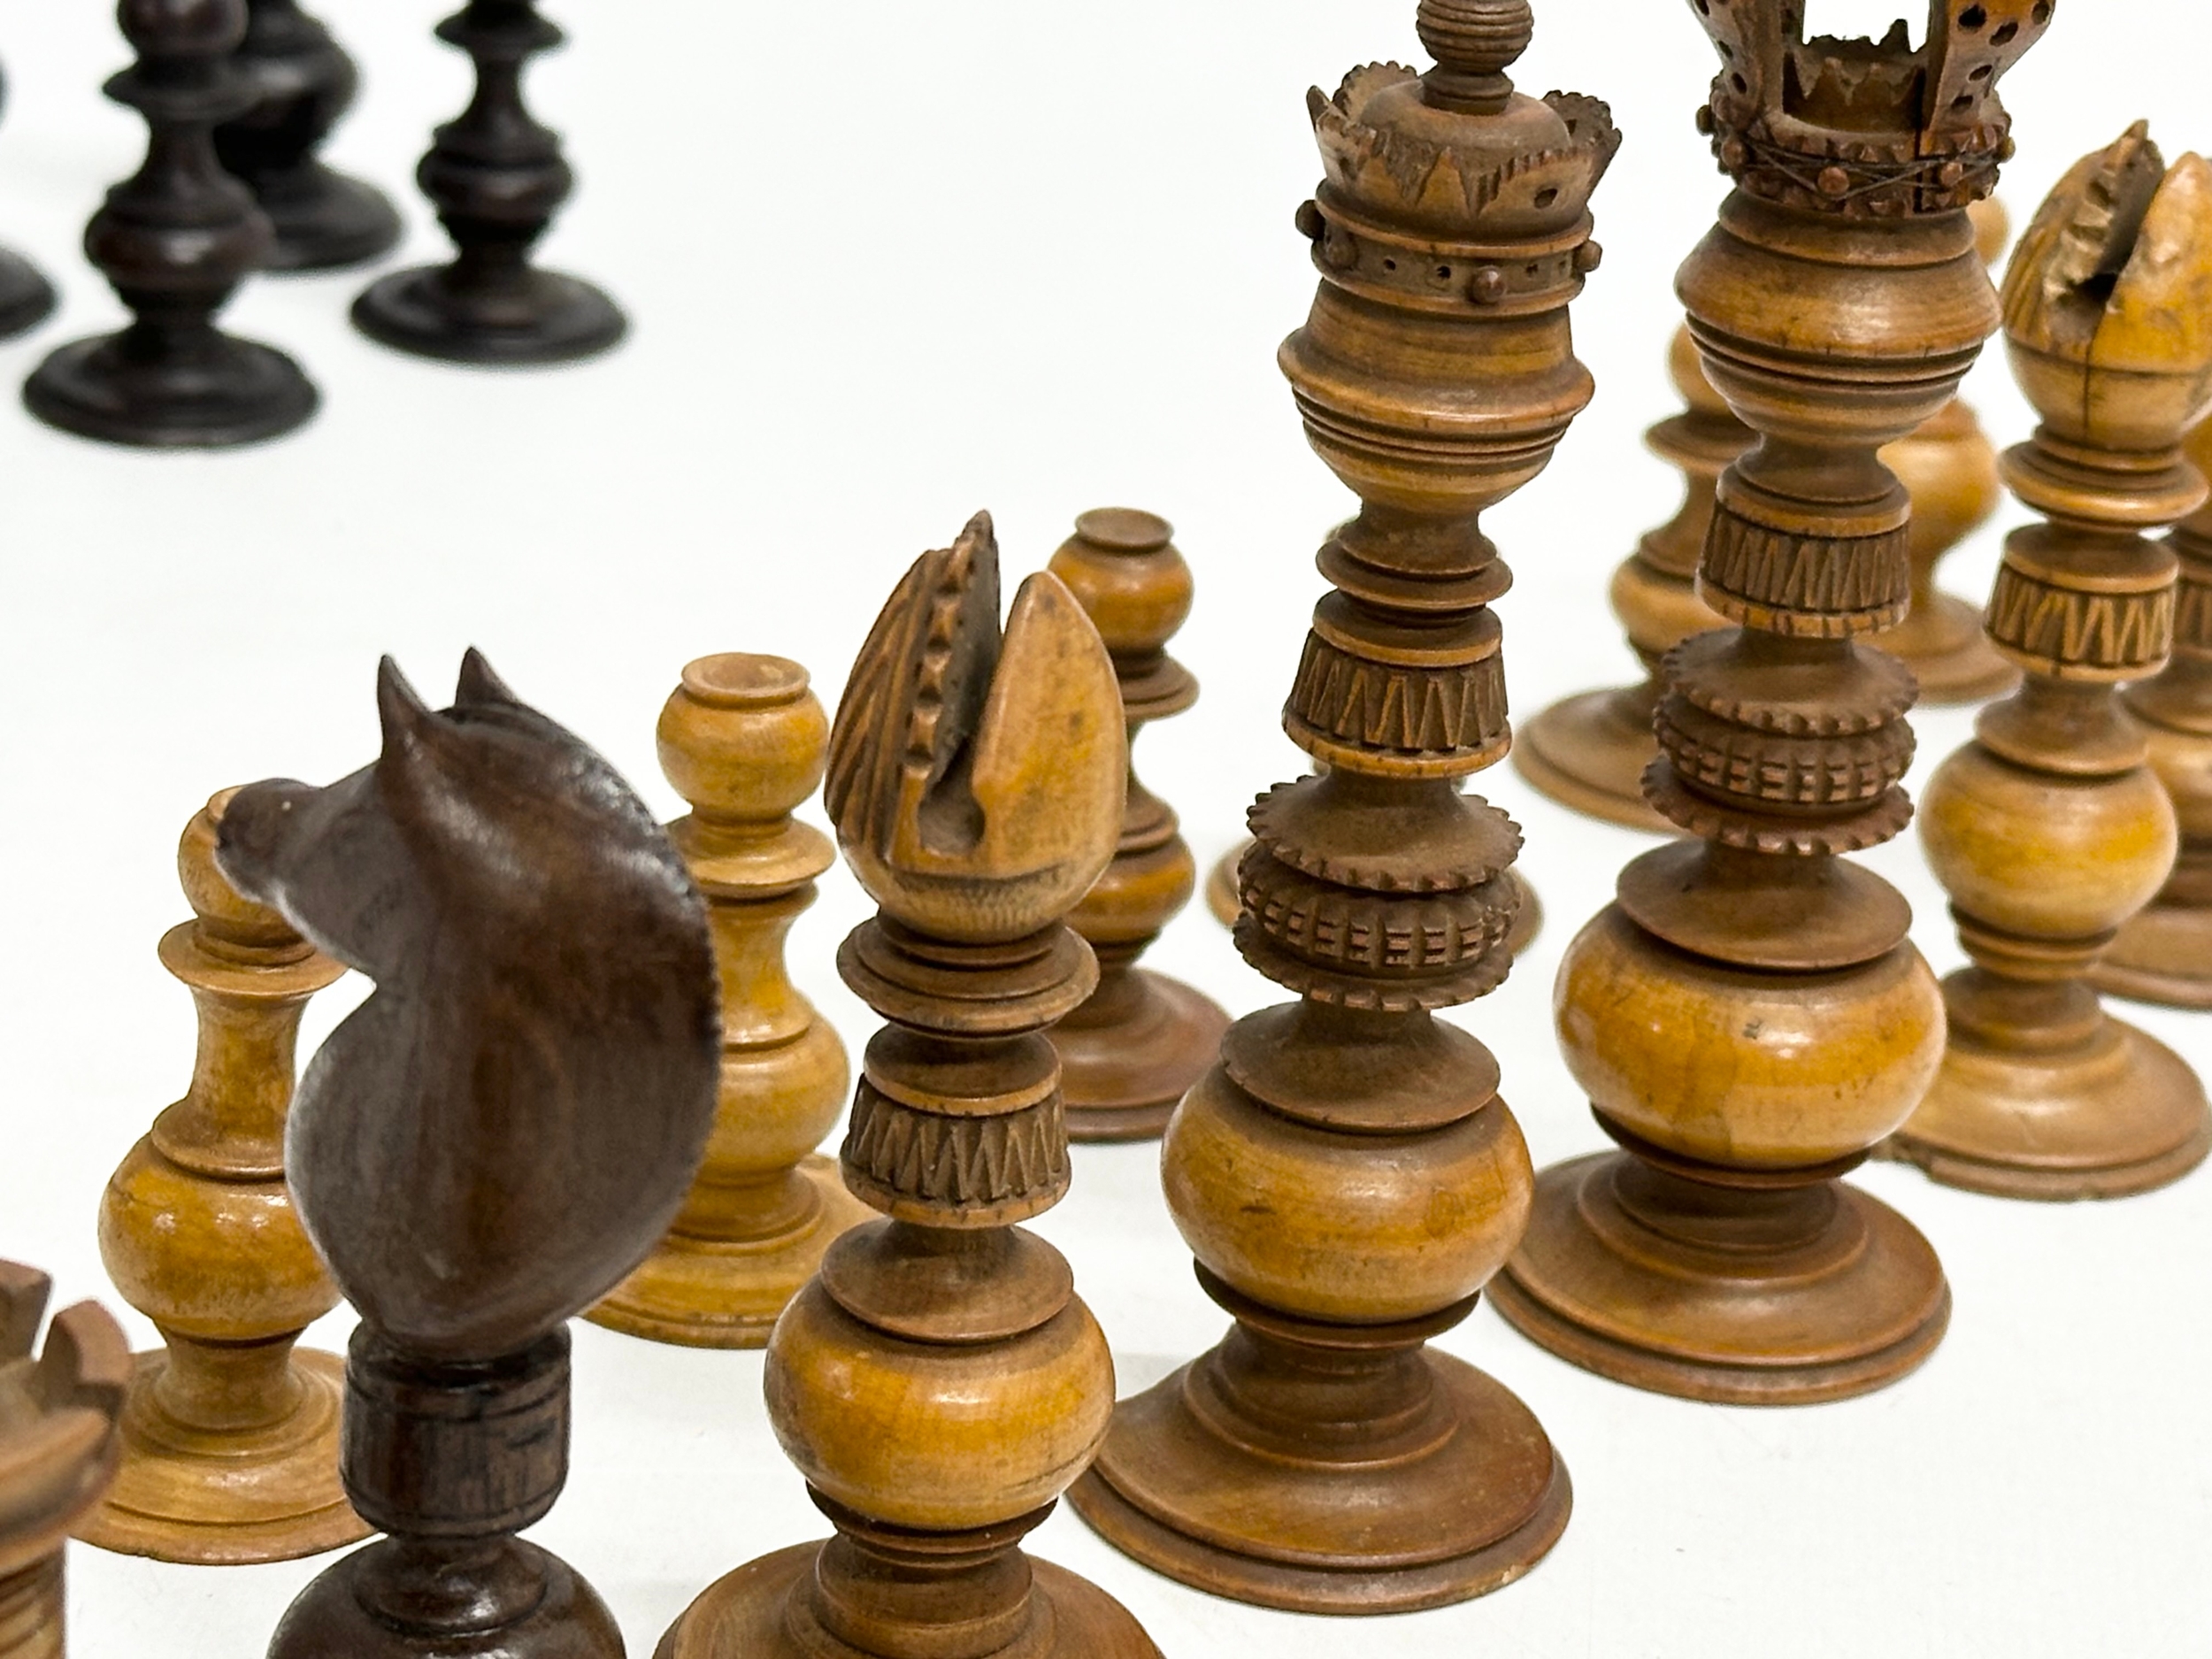 Good quality 19th Century chess pieces in the style of the Holy Land Crusade, Islamic vs Christian - Image 9 of 17